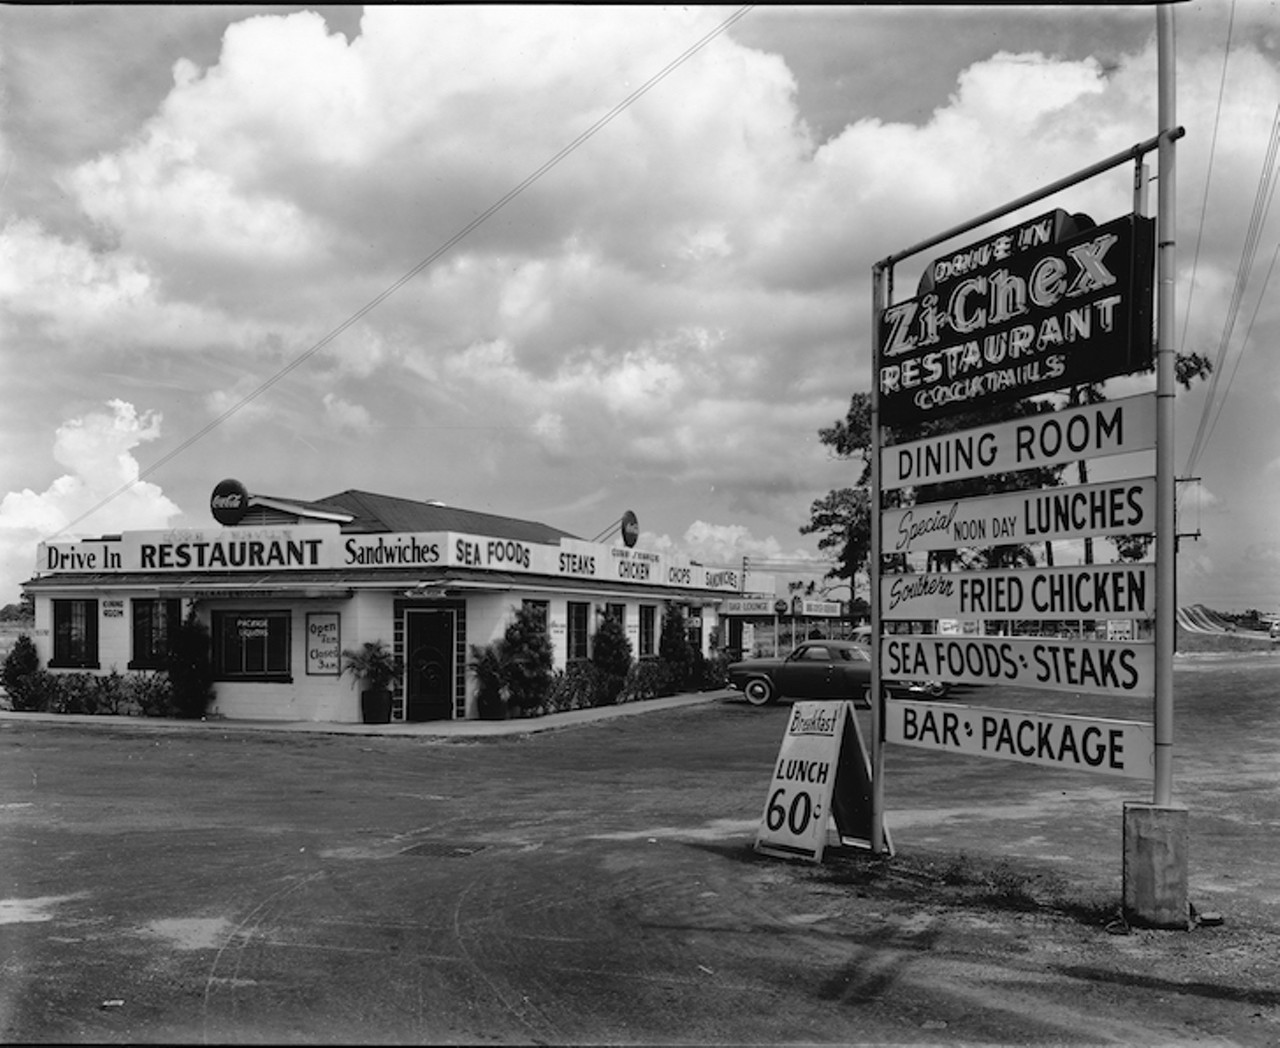 THEN
Zi-Chex Drive Inn Restaurant
3801 Gandy Boulevard, 1952.
After World War II drive-in restaurants were the rage and Zi-Chex joined the fray in 1952. Unlike other such restaurants, Zi-Chex also had a lounge and served cocktails. Lunches were $0.60, specializing in southern delicacies like fried chicken, seafood, and steaks. Being in close proximity to MacDill Air Force Base was a plus, and they were convenient to the Tampa Jai Alai Fronton to the south and Derby Lane dog track to the west, sometimes snagging hungry gamblers.